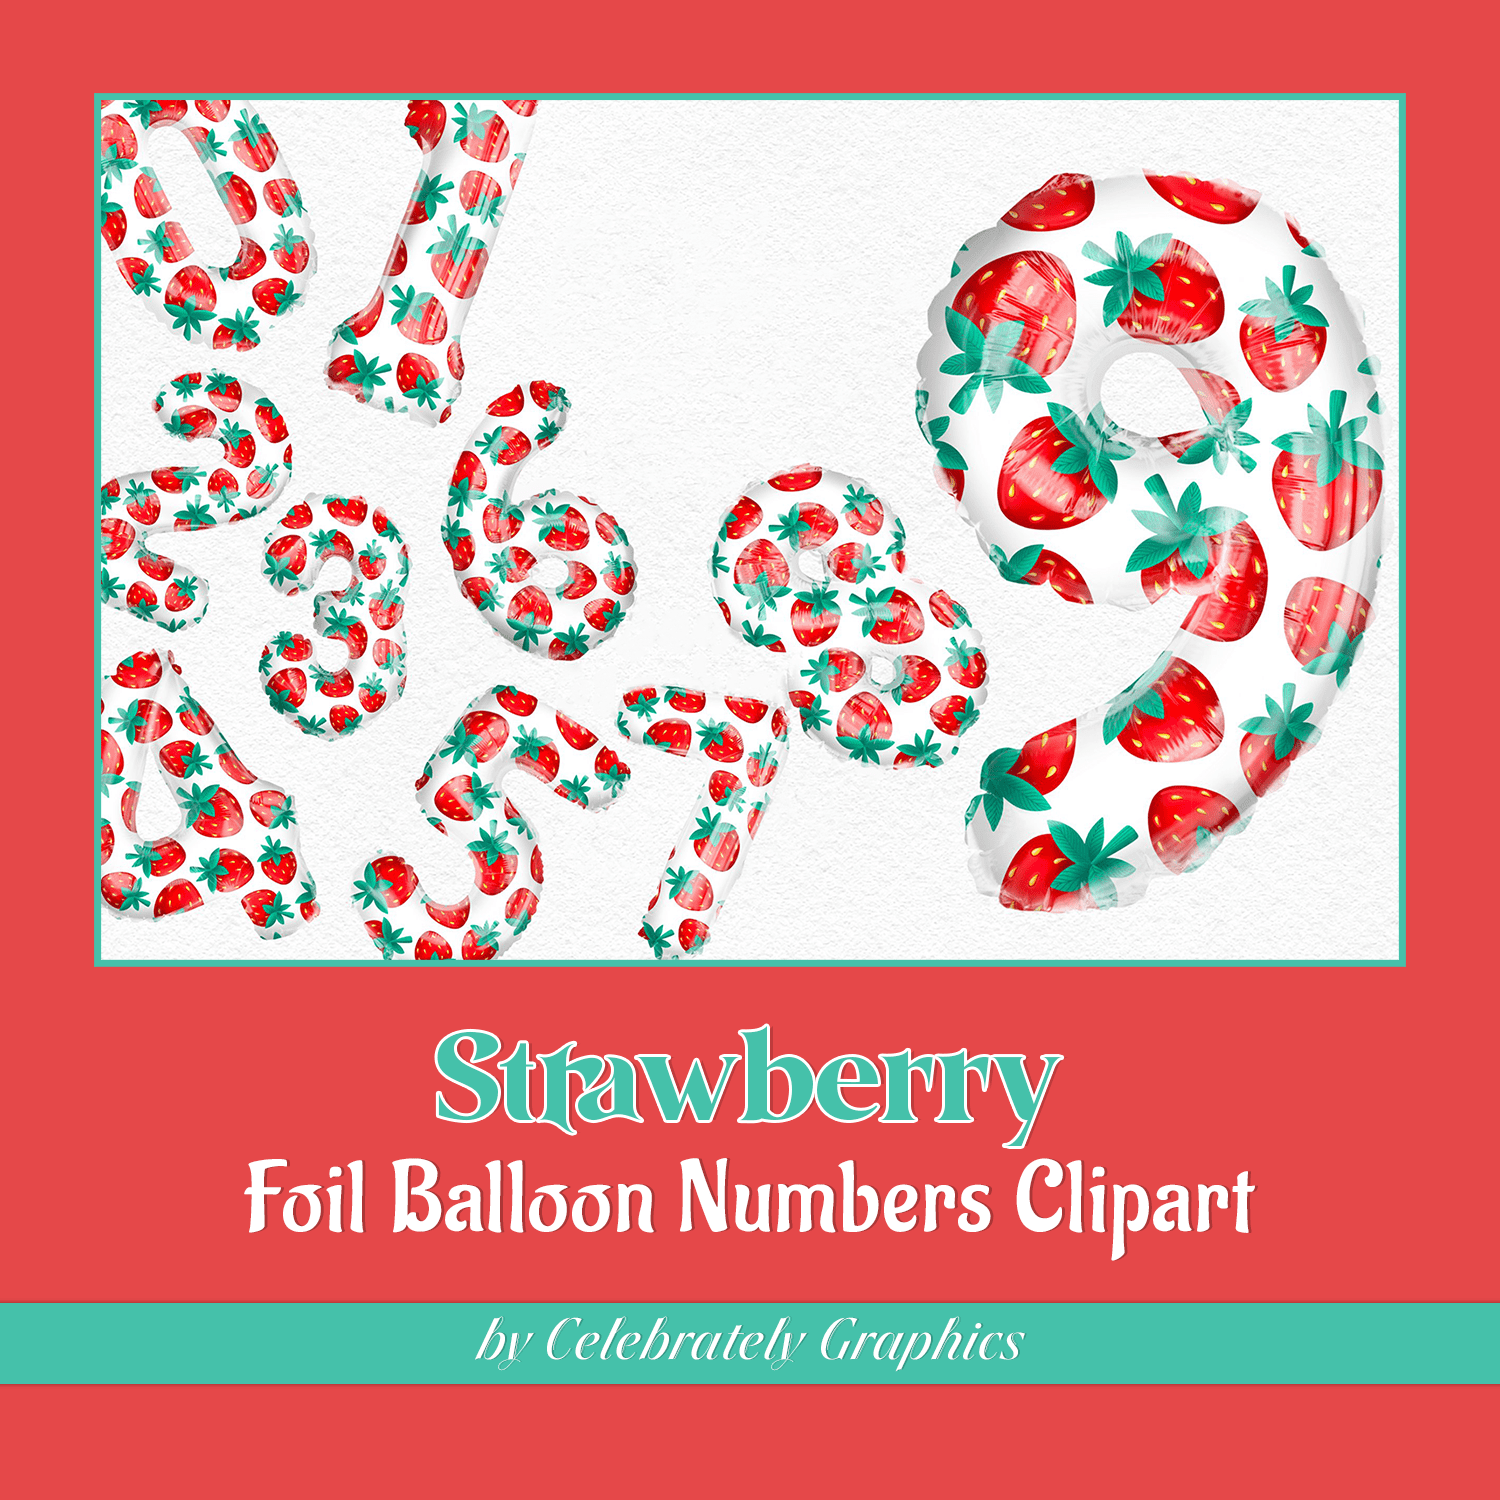 Strawberry | Foil Balloon Numbers Clipart PNG Cover.